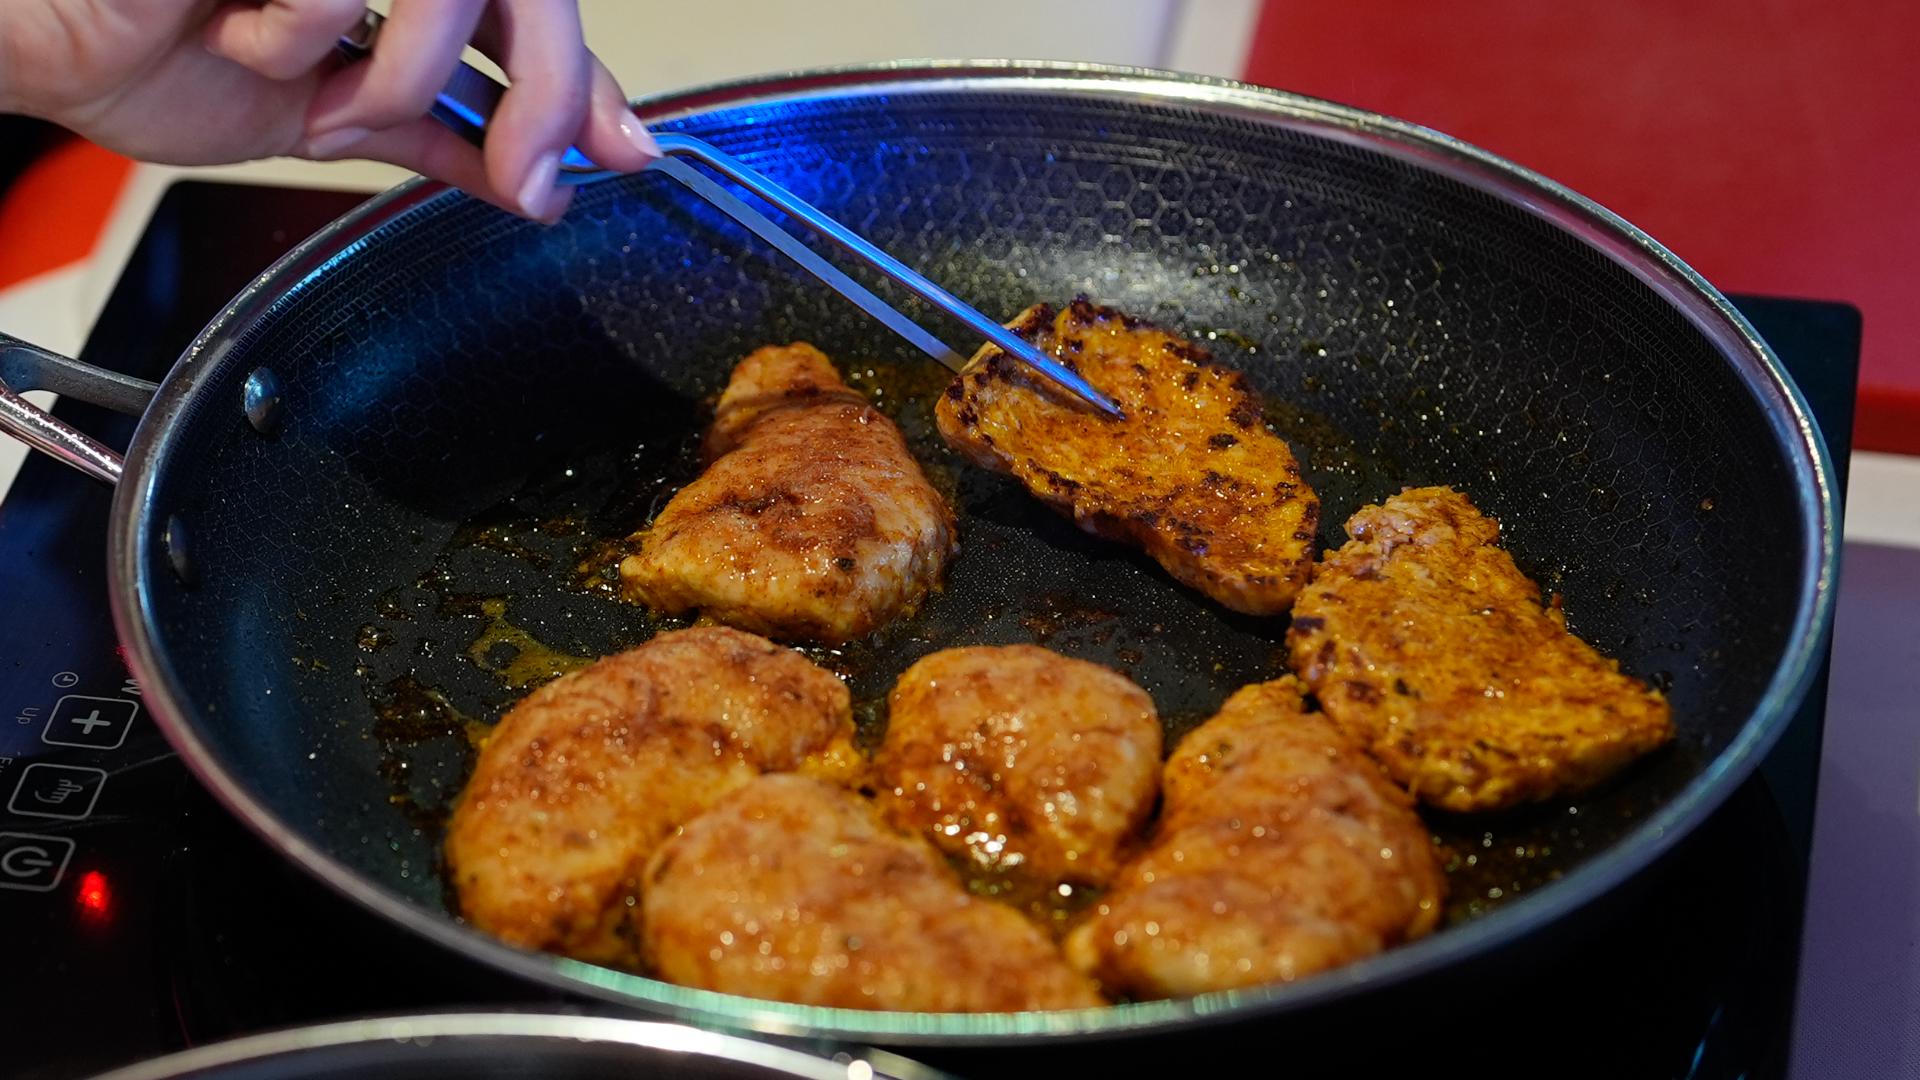 As Florida's ban on "lab-grown” meat is set to go into effect, manufacturer Upside Foods hosted a last hurrah — at least for now — with a cultivated chicken-tasting.